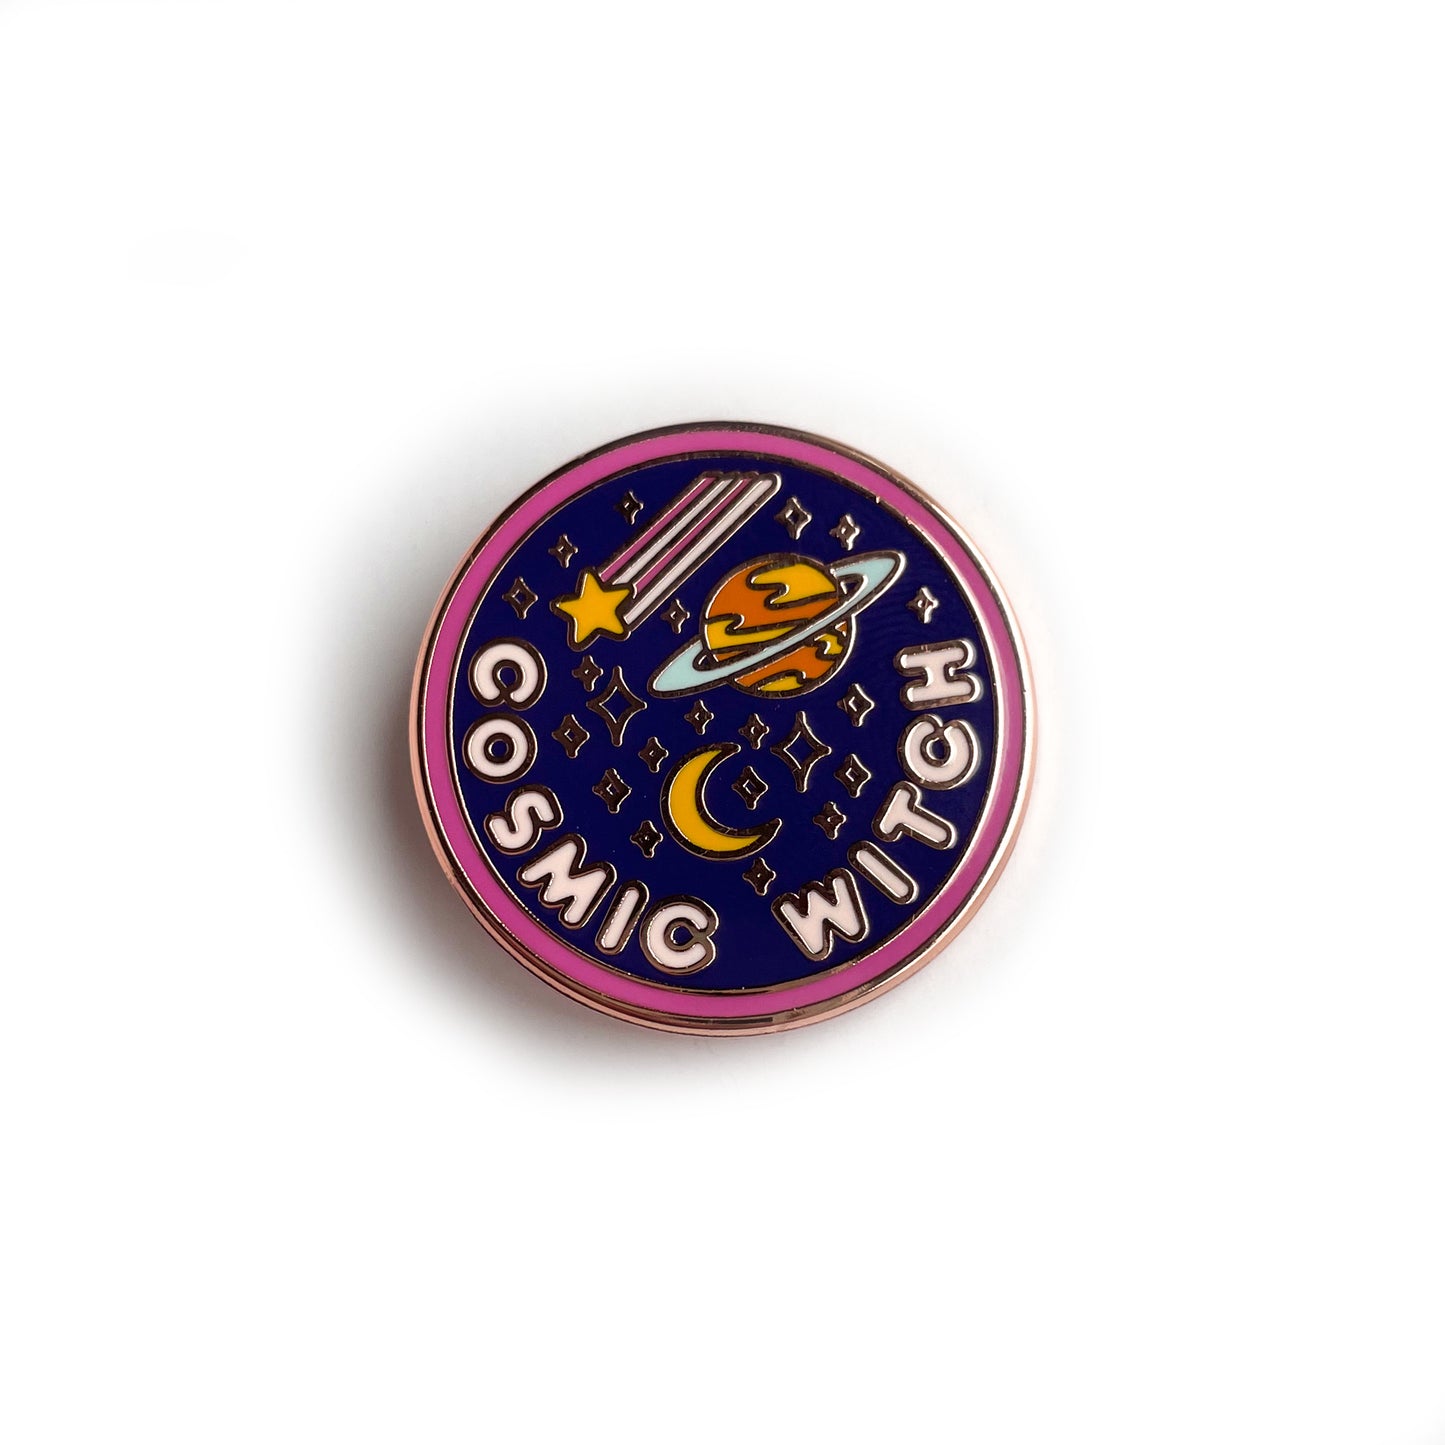 A circular enamel pin. It has a hot pink border, a navy background and light pink letters that read "Cosmic Witch." It also has stars, a crescent moon, a shooting star, and the planet Saturn depicted on it. 